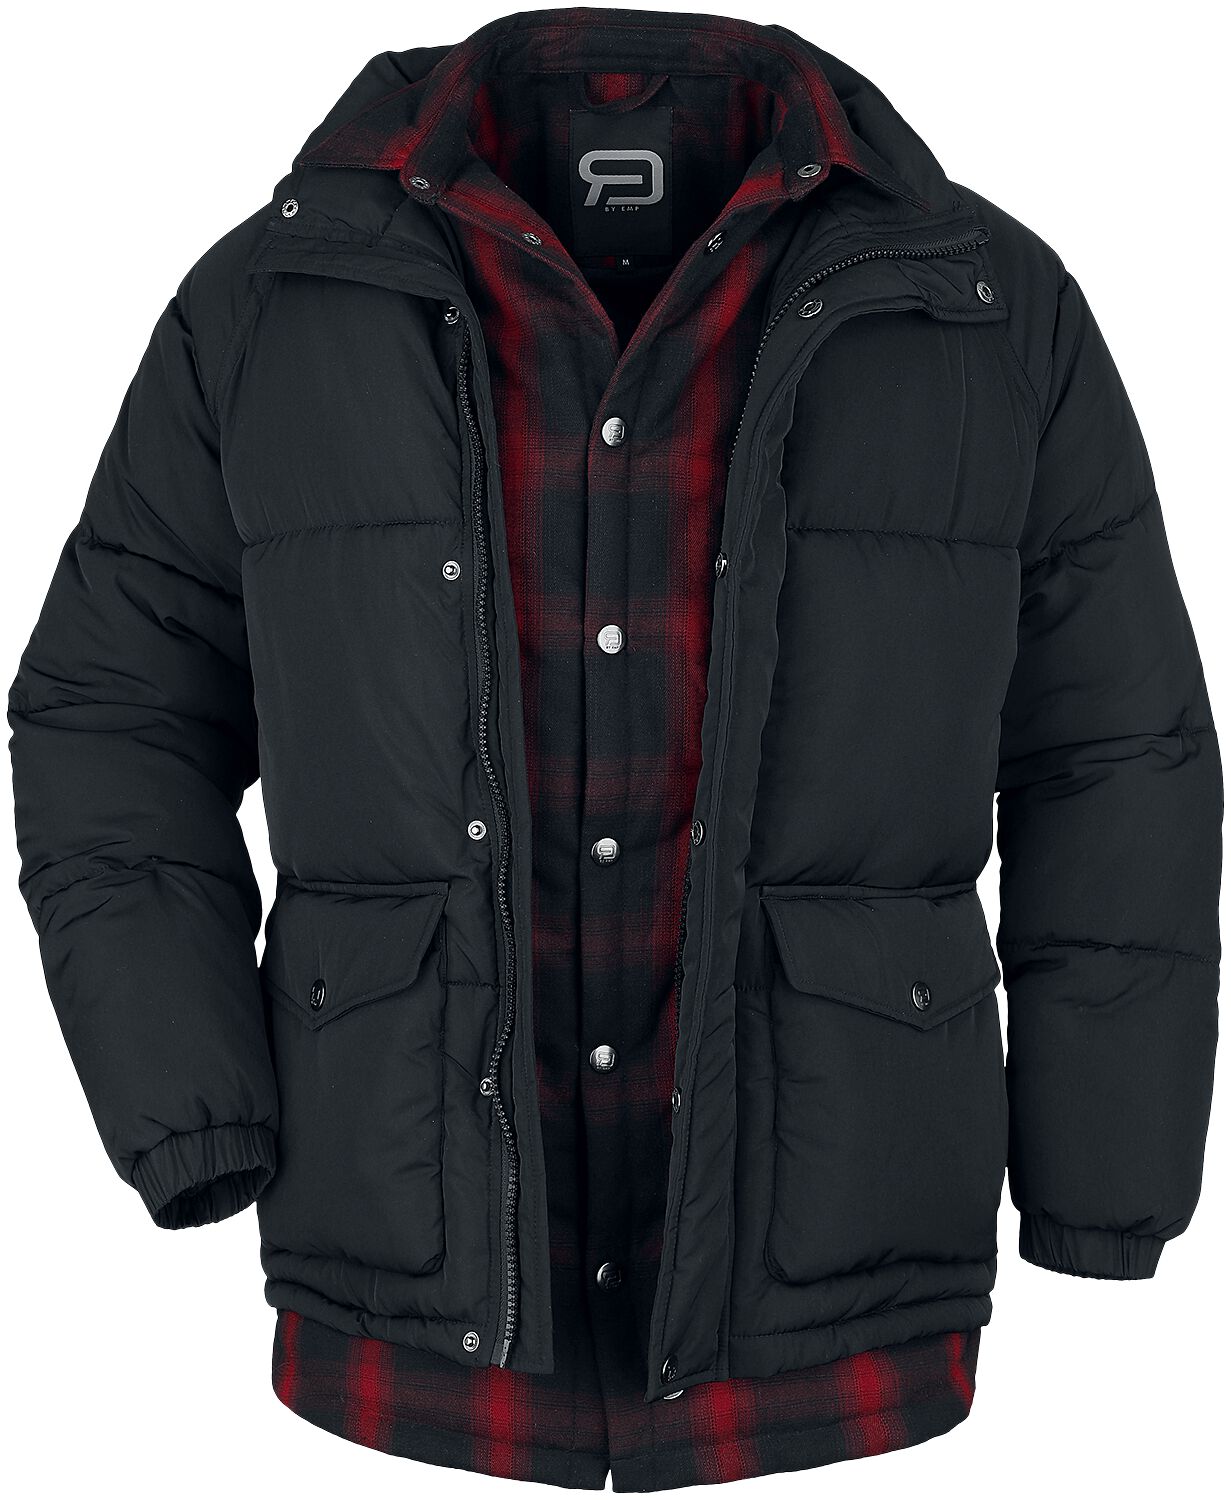 Image of Giacca invernale di RED by EMP - Jacket with double-layer effect - S a XXL - Uomo - nero